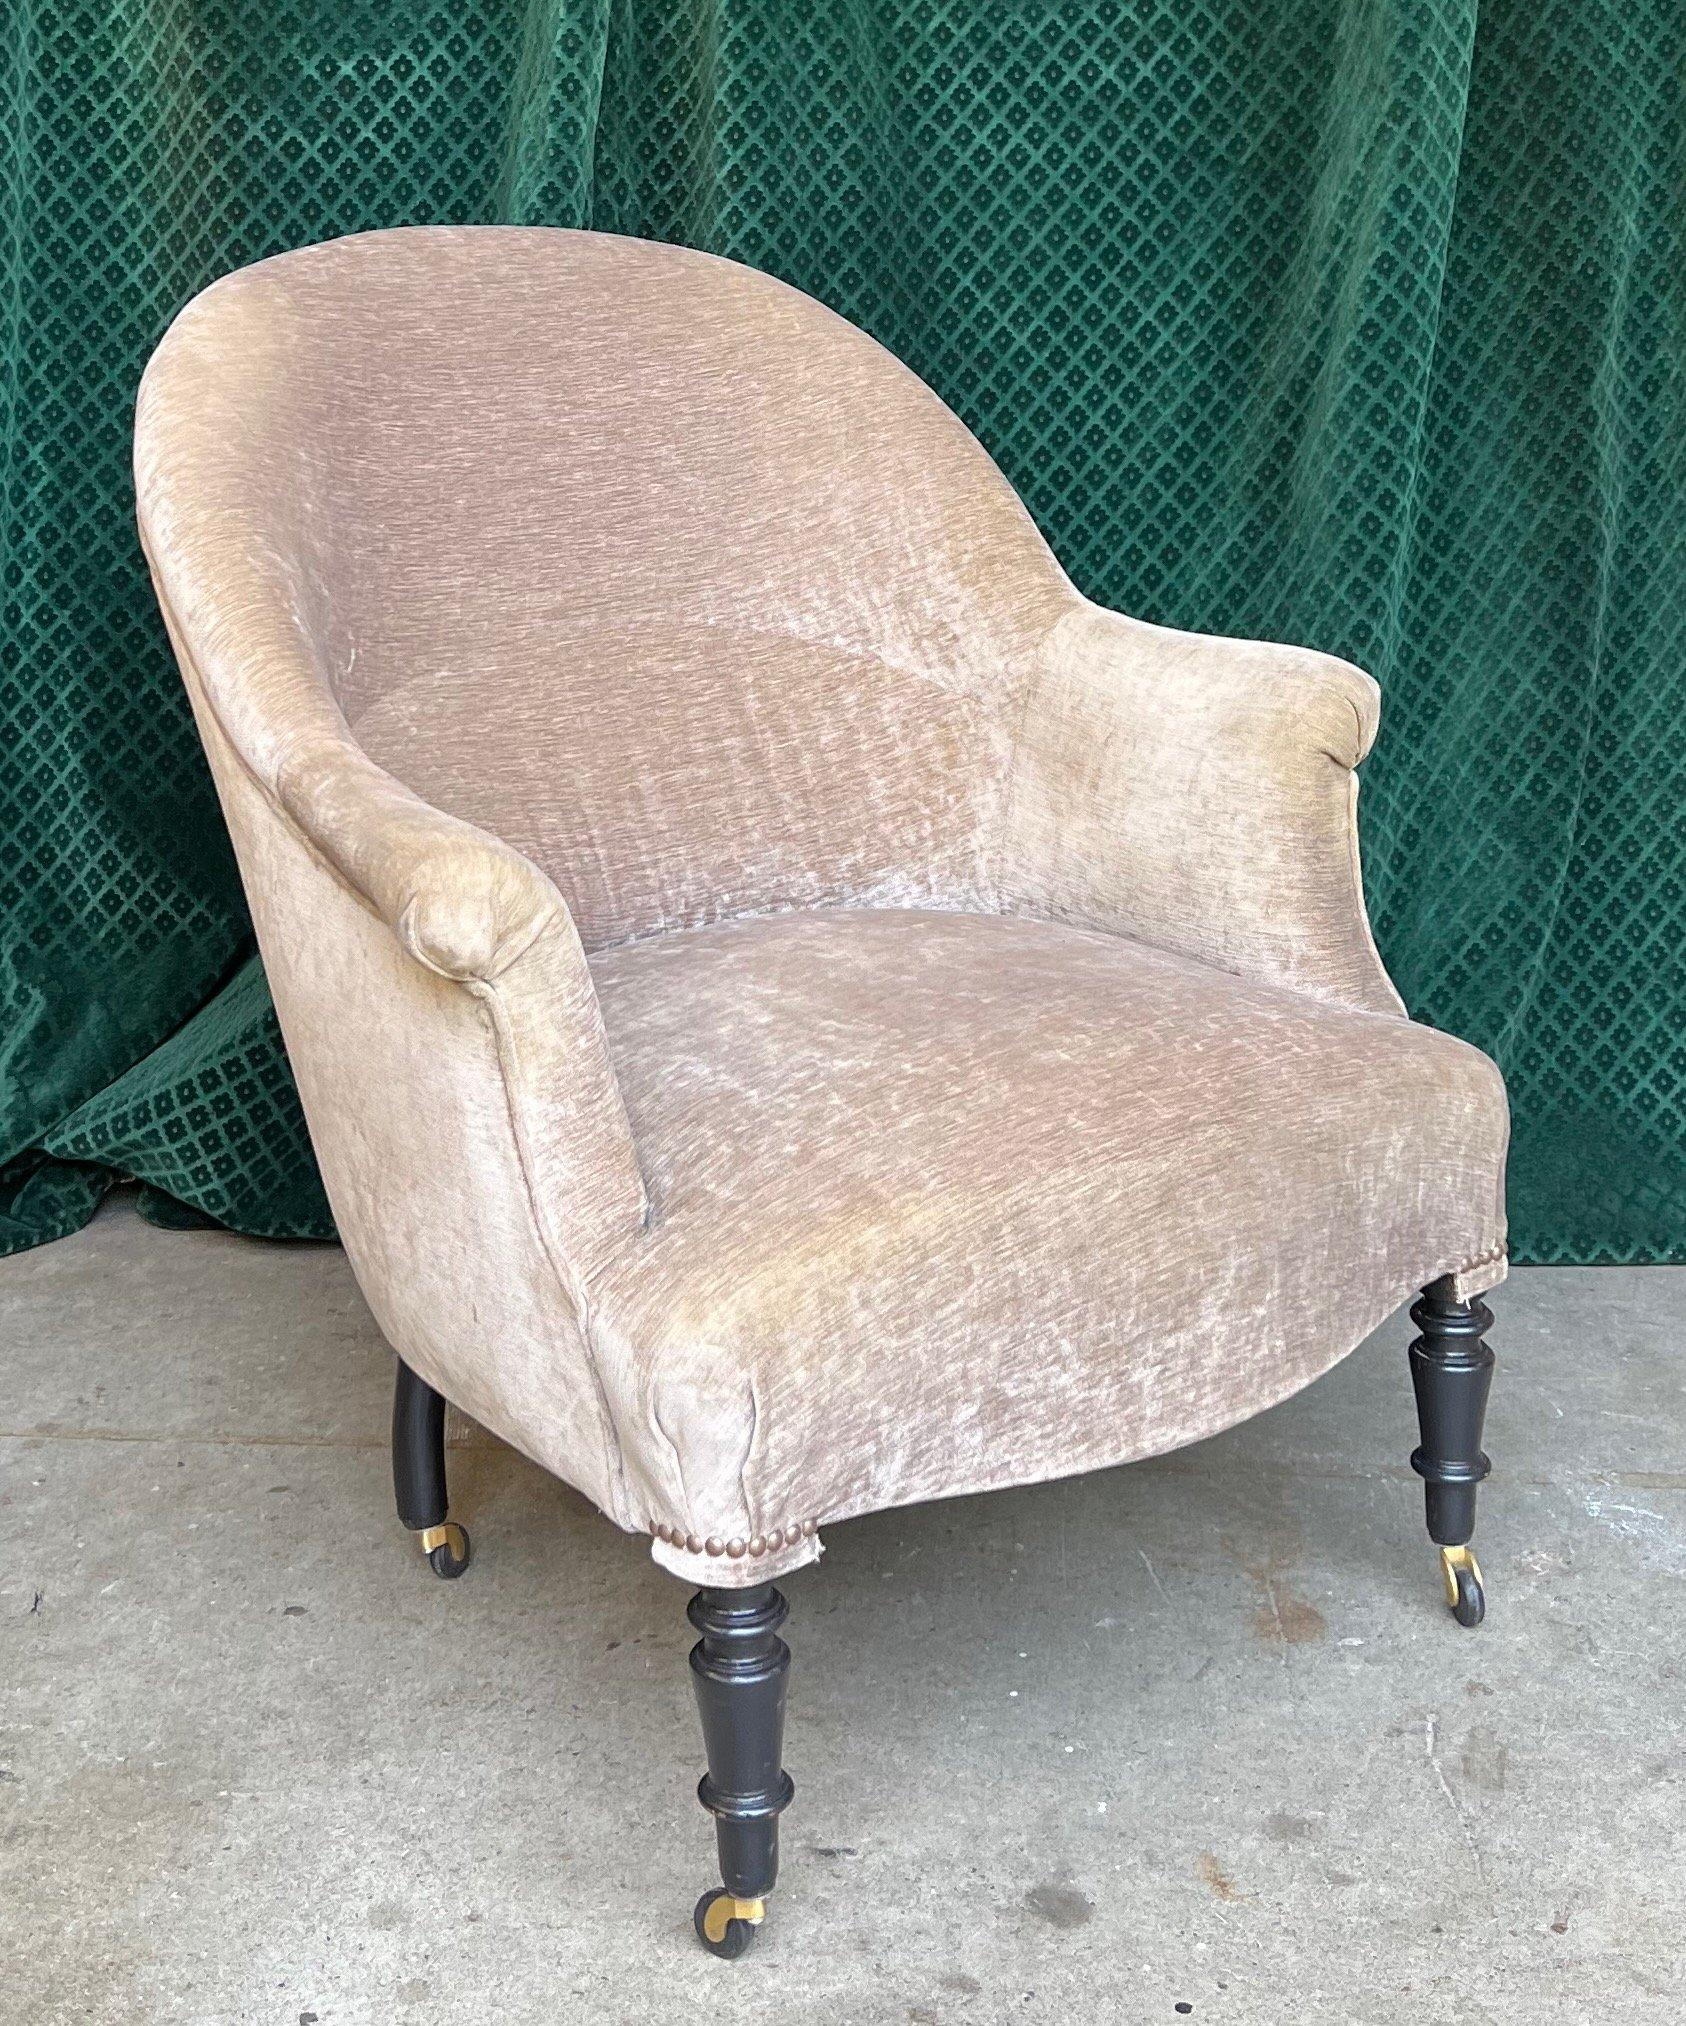 This Napoleon III-style armchair, hailing from the late 19th century in France, is a small-scale model that exudes elegance. The recent addition of new casters not only enhances its aesthetic appeal but also facilitates easy movement around a room.